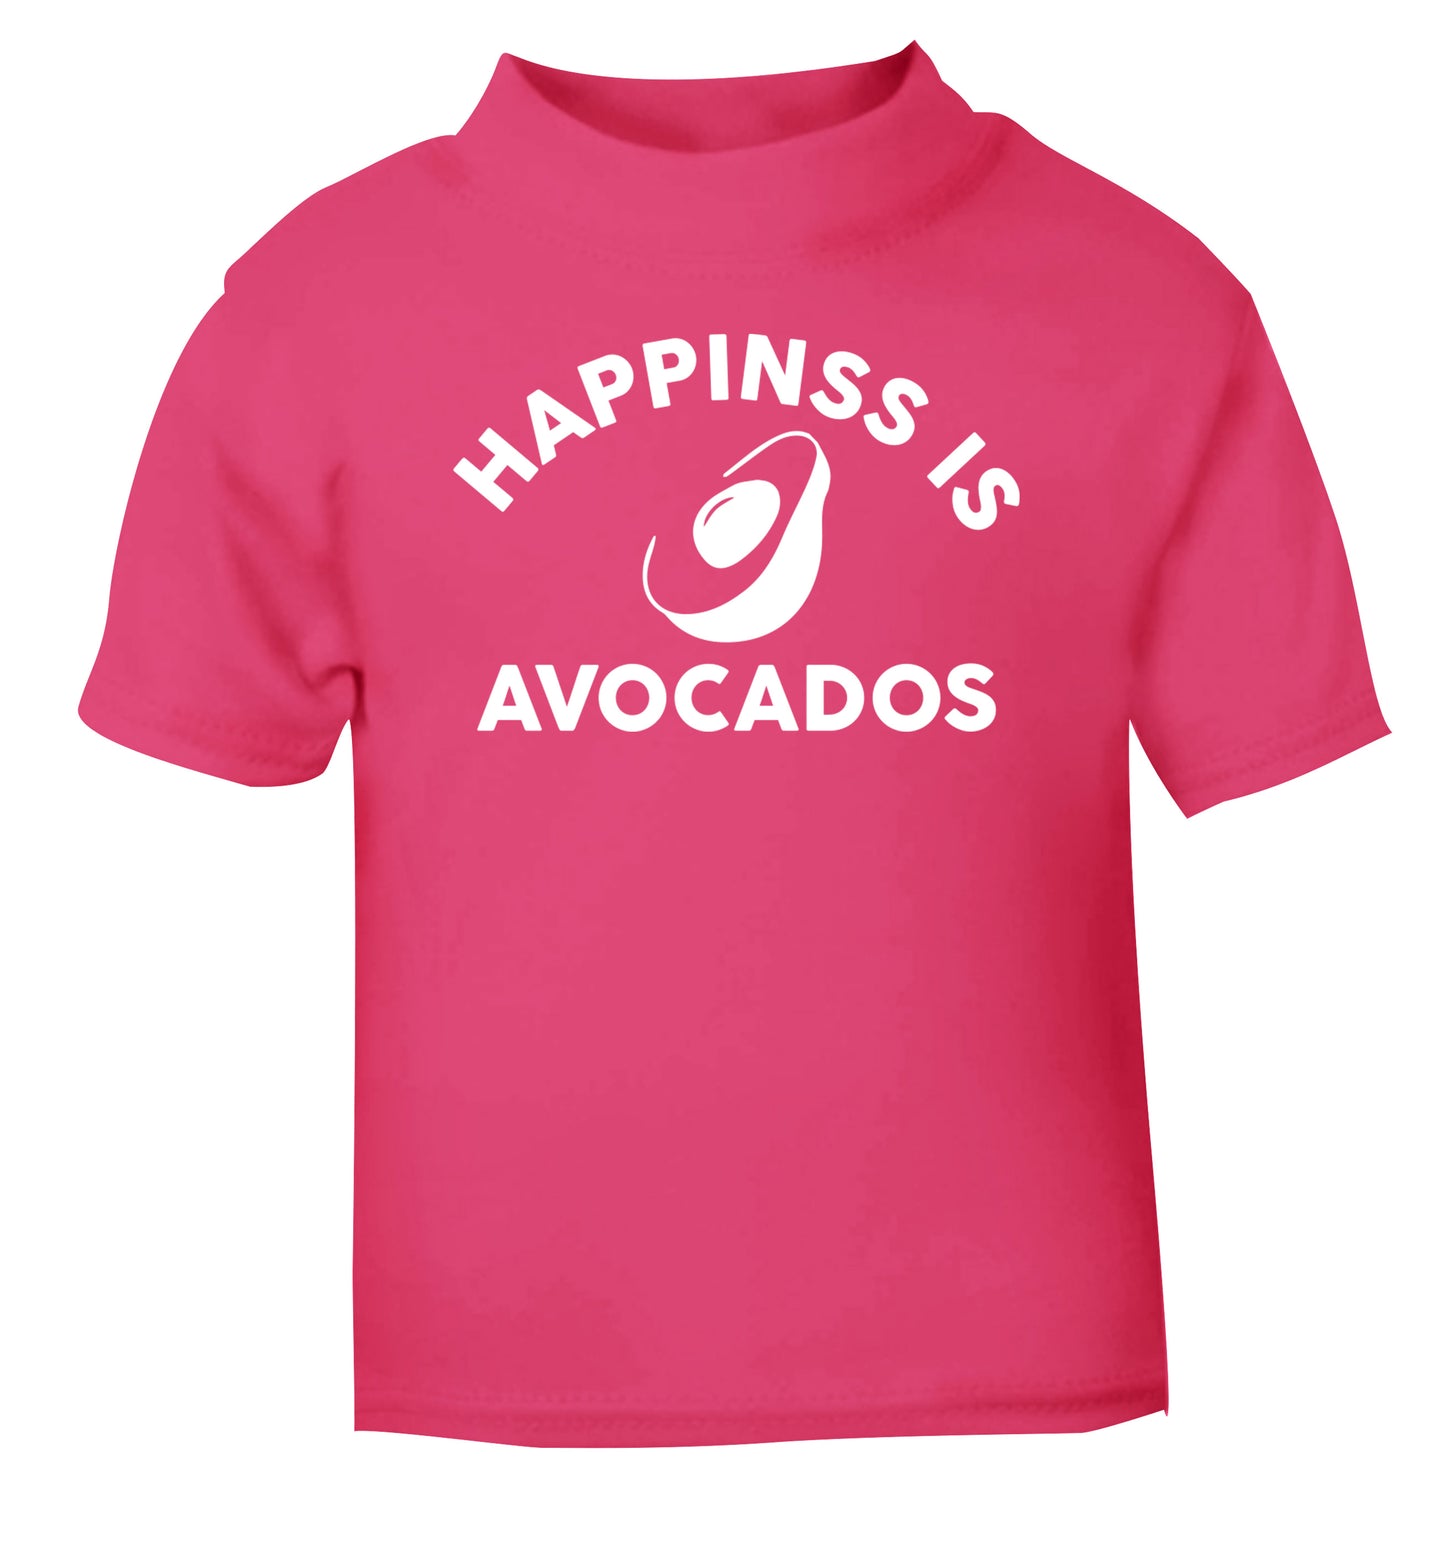 Happiness is avocados pink Baby Toddler Tshirt 2 Years